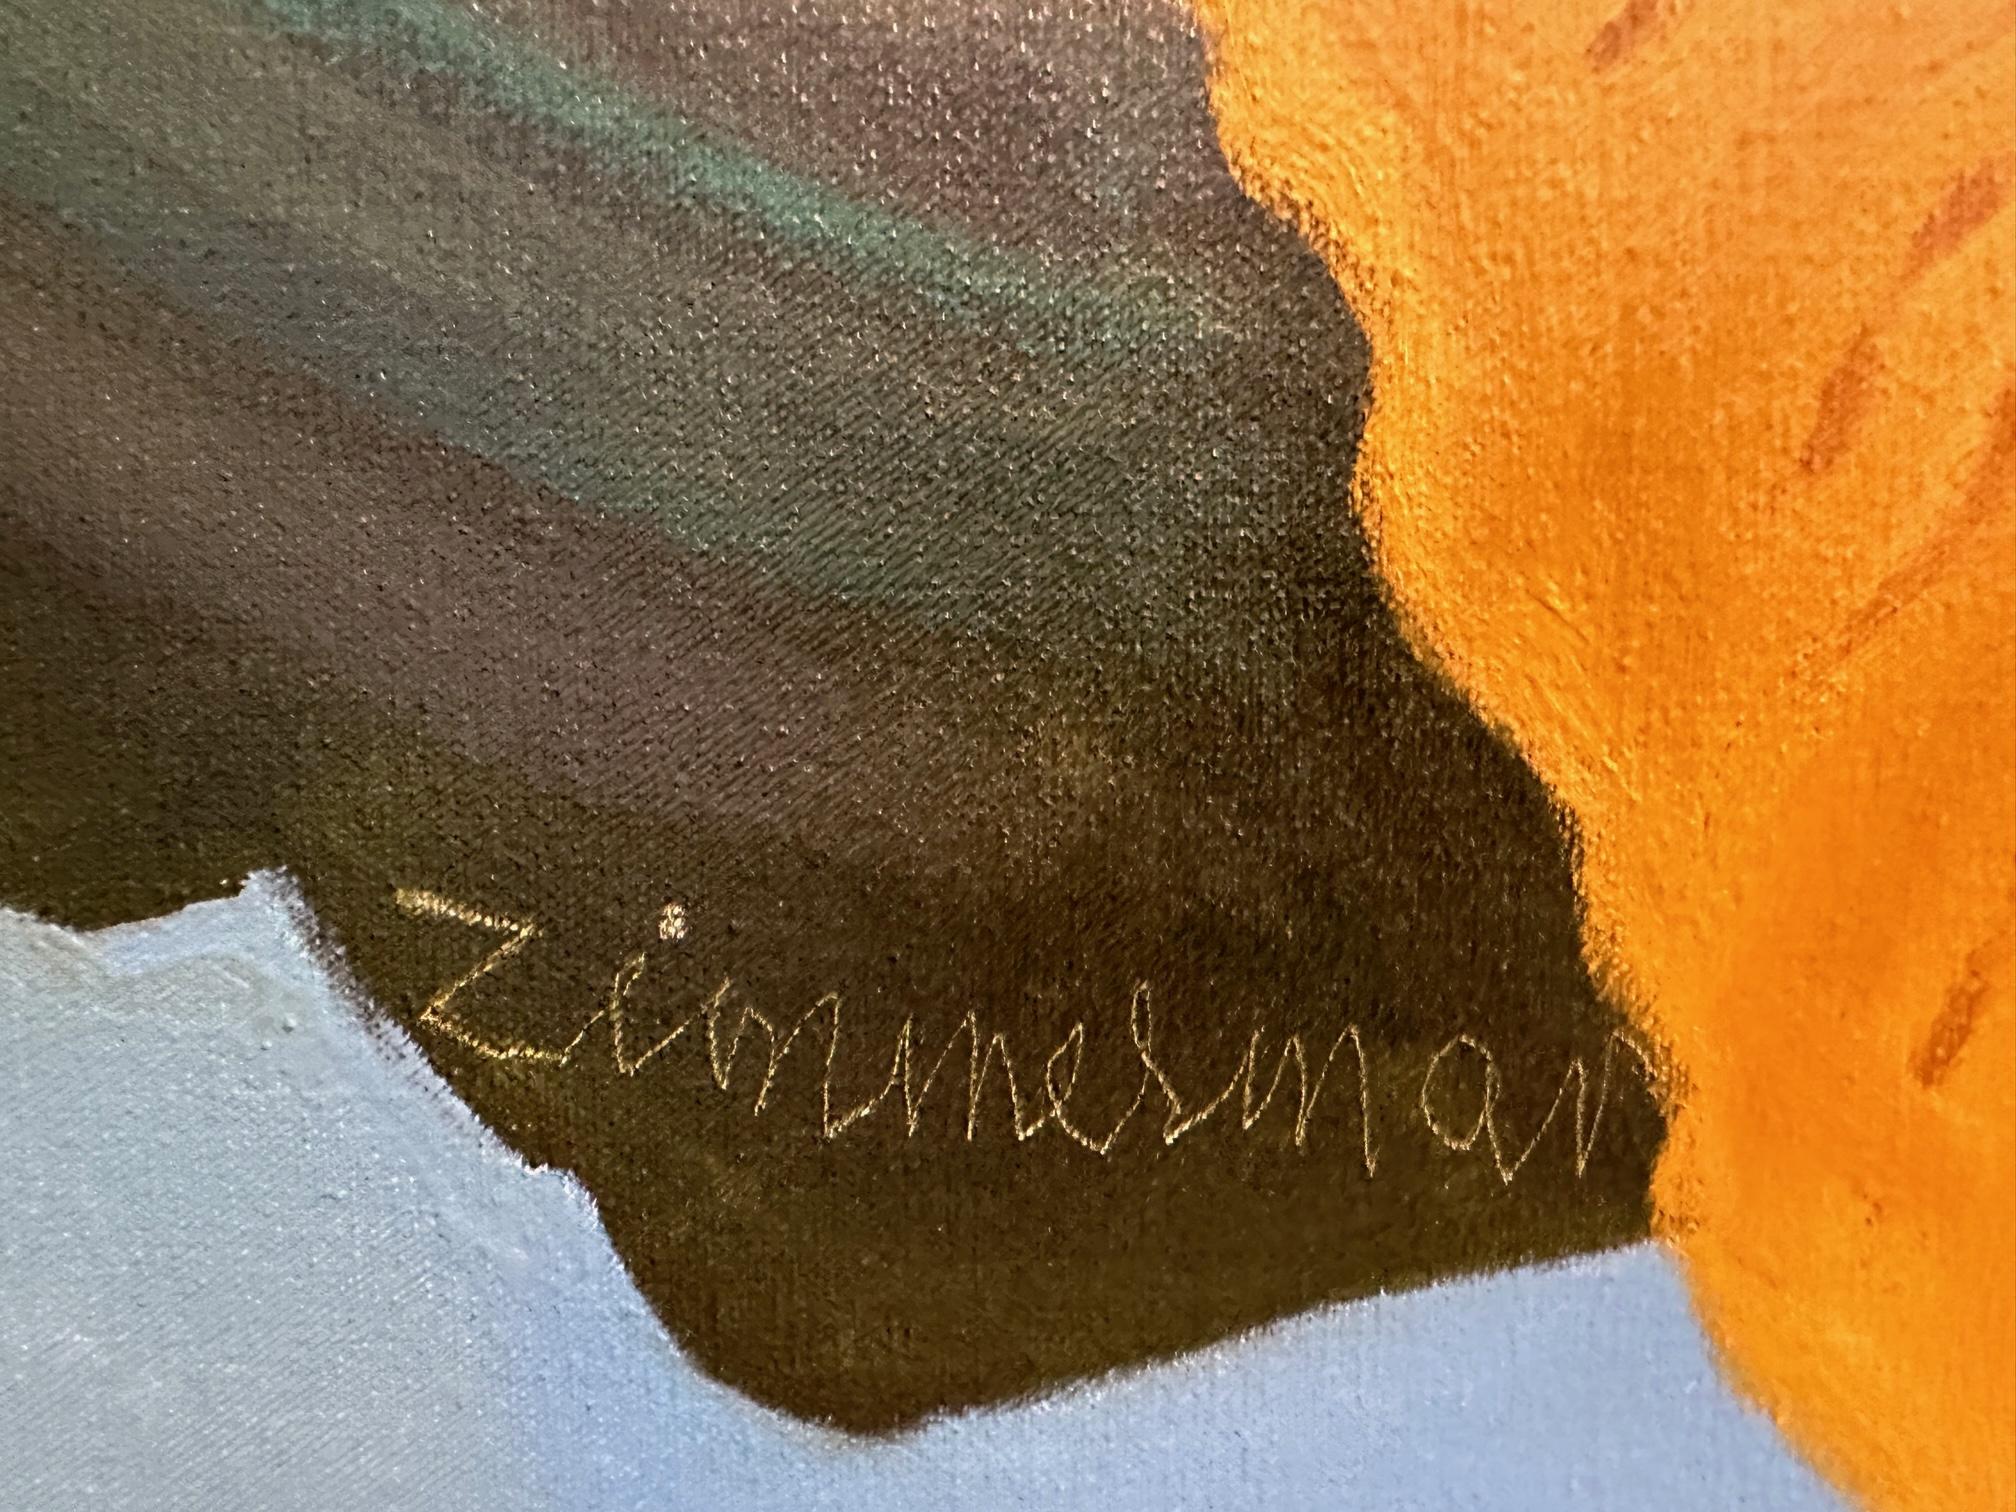 This masterpiece is exhibited in the Zimmerman Gallery, Carmel CA.

The painting comes with a certificate of authenticity and a letter of appraisal.

Marc Zimmerman creates playful paintings, whether deep mysterious jungle or delightfully whimsical